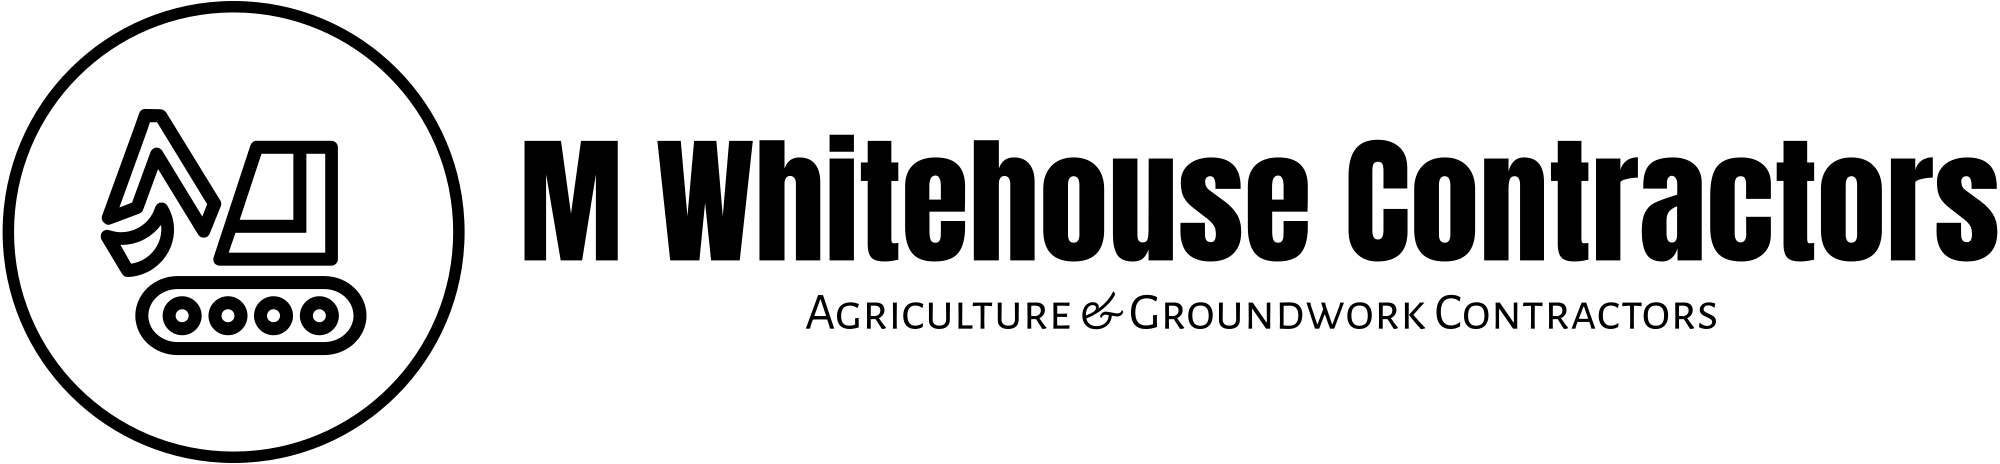 M Whitehouse Groundwork & Agricultural Contractors Staffordshireust another WordPress site